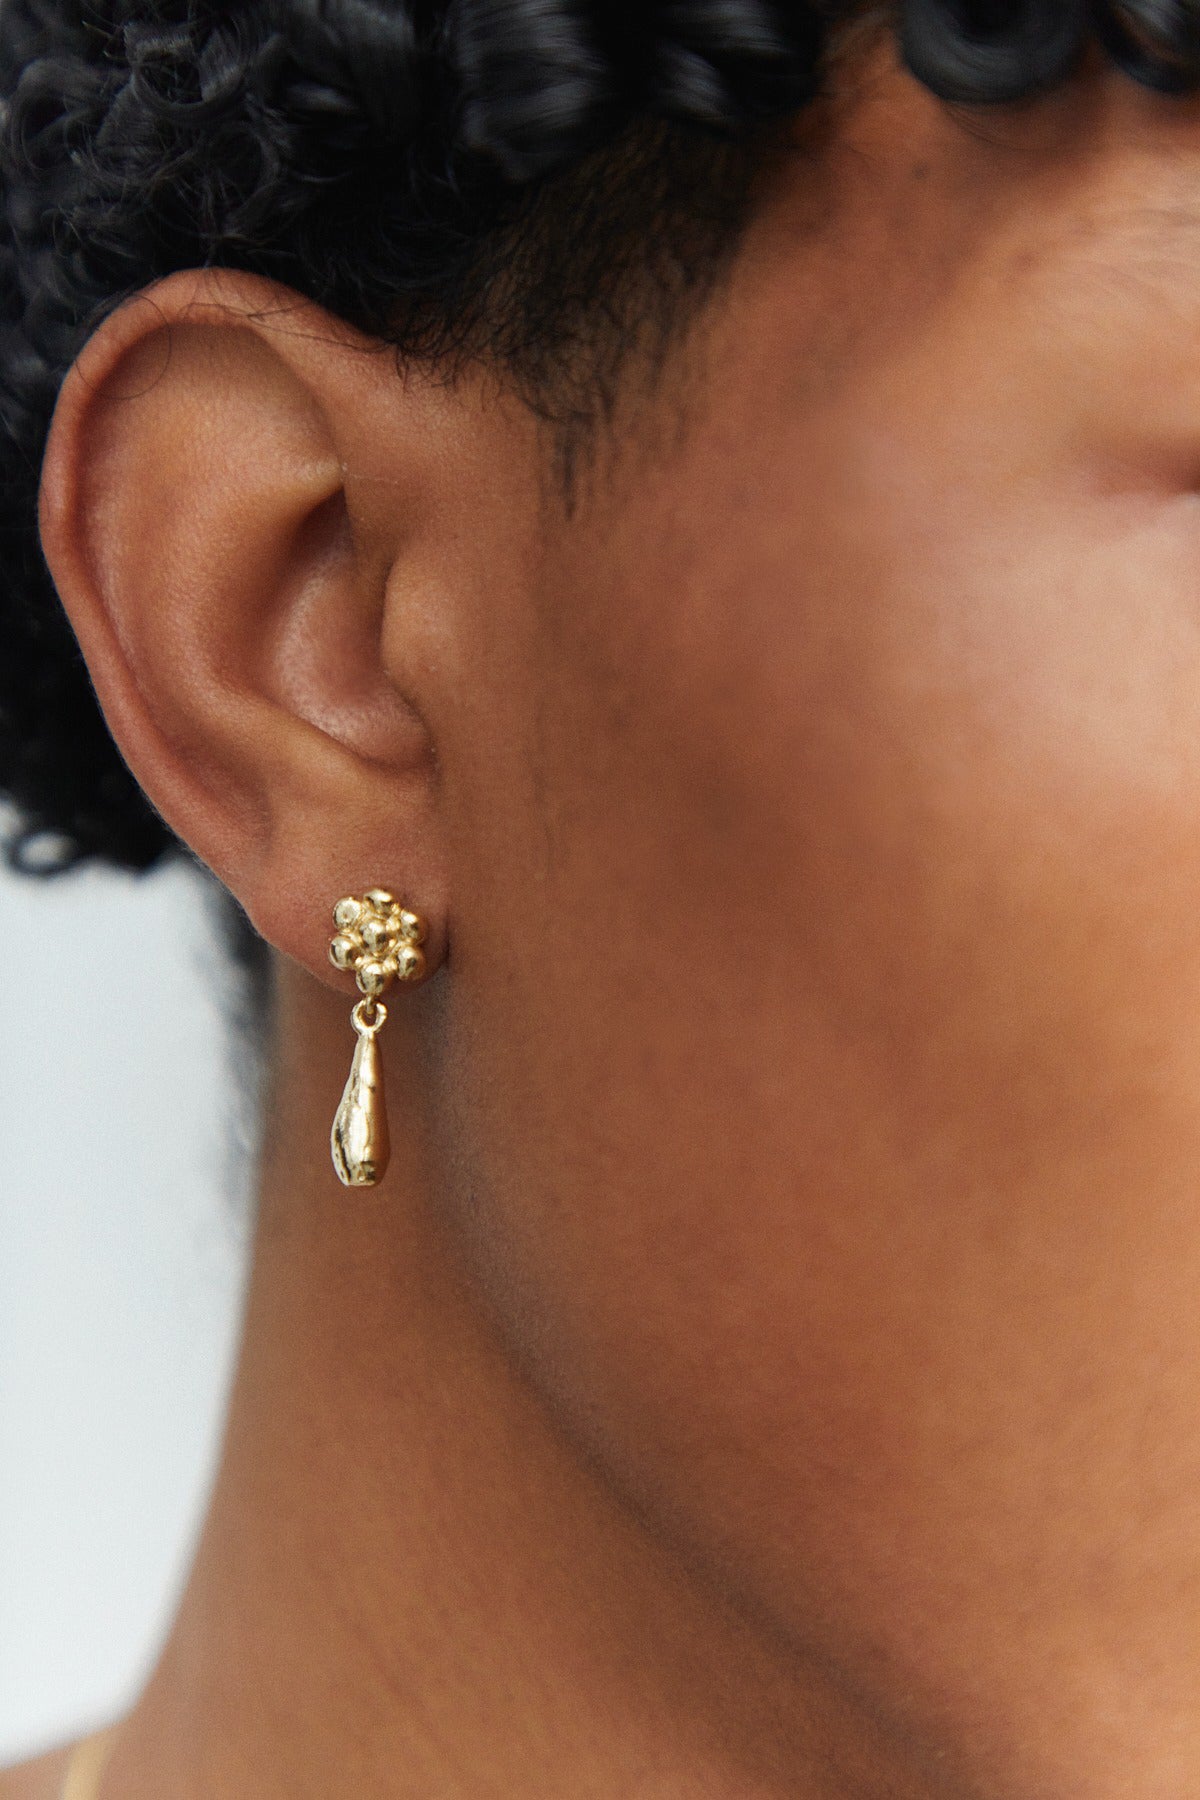 A pair of gold earrings with flower post and teardrop charm.